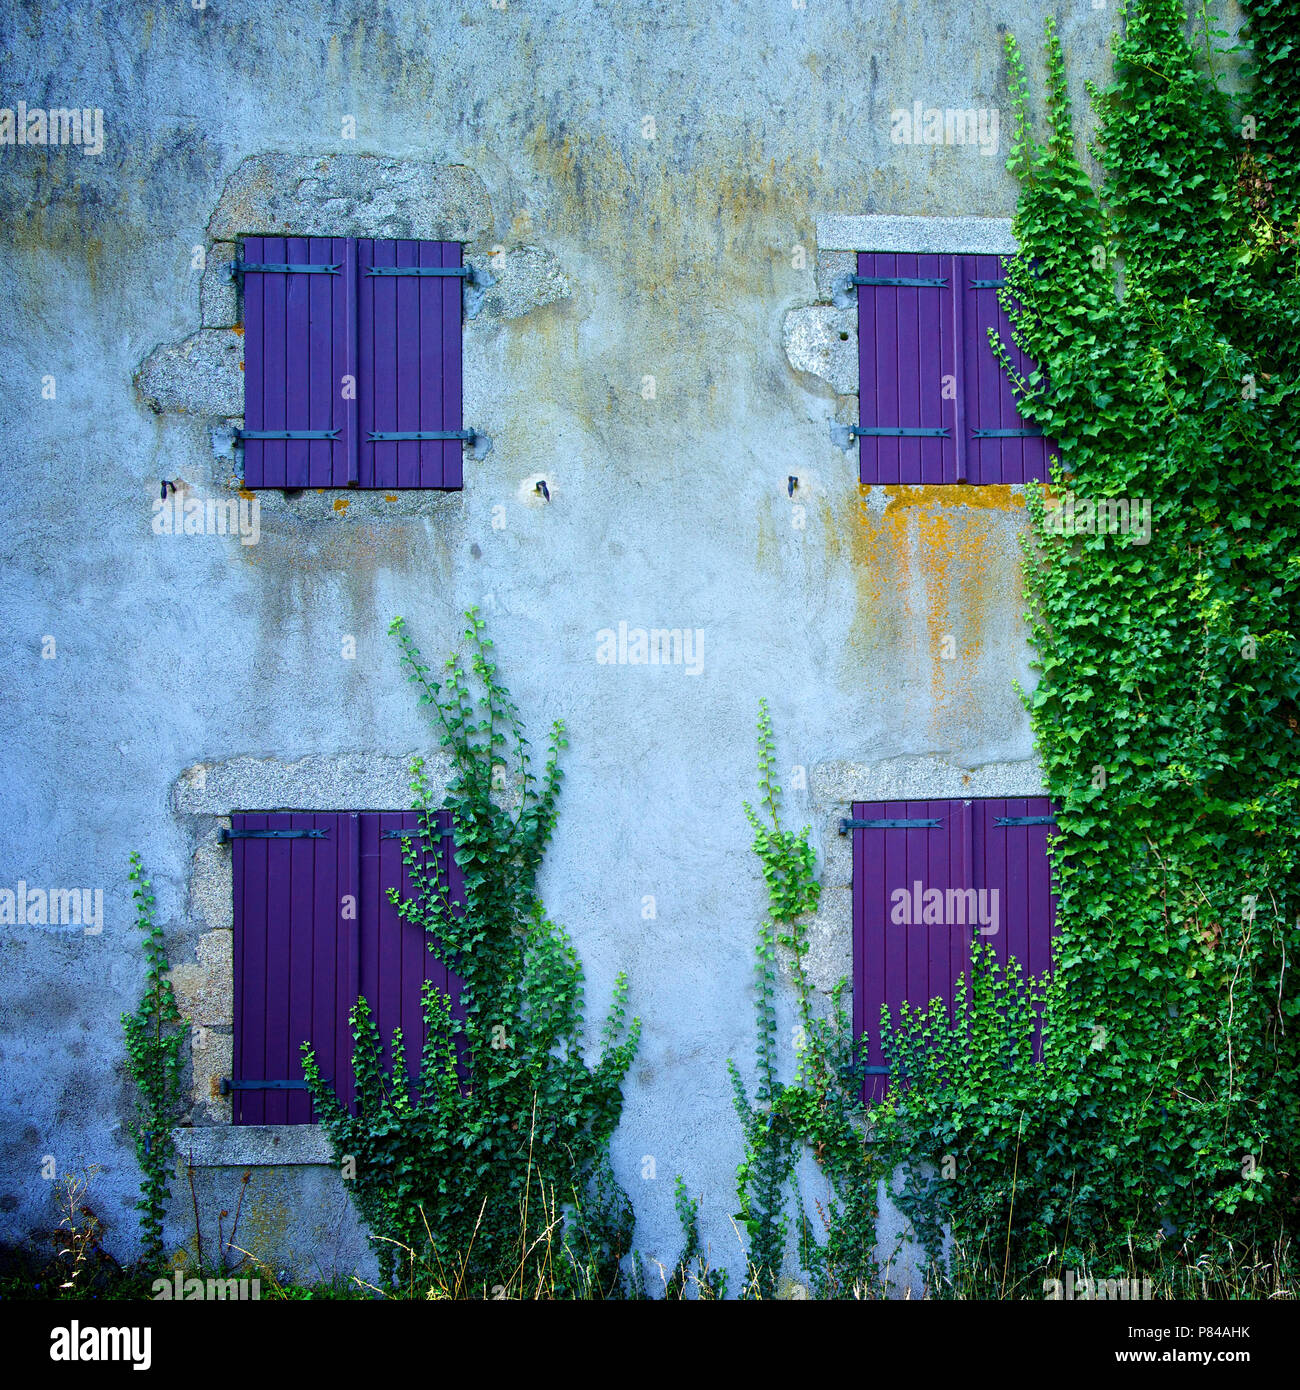 Vines growing on a shuttered building. France Stock Photo